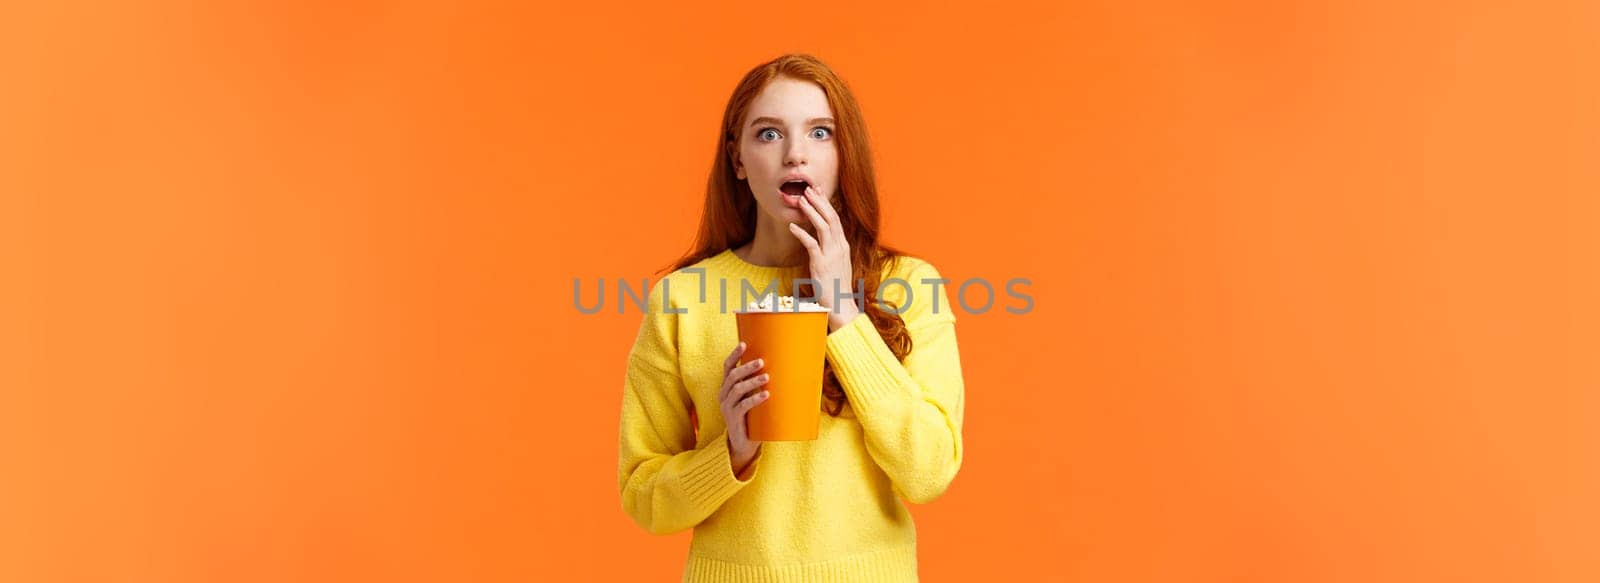 Shocked and interested, entertained redhead girl watching awesome new movie on big screen, eating popcorn, gasping open mouth astounded, startled of cool film plot, orange background by Benzoix